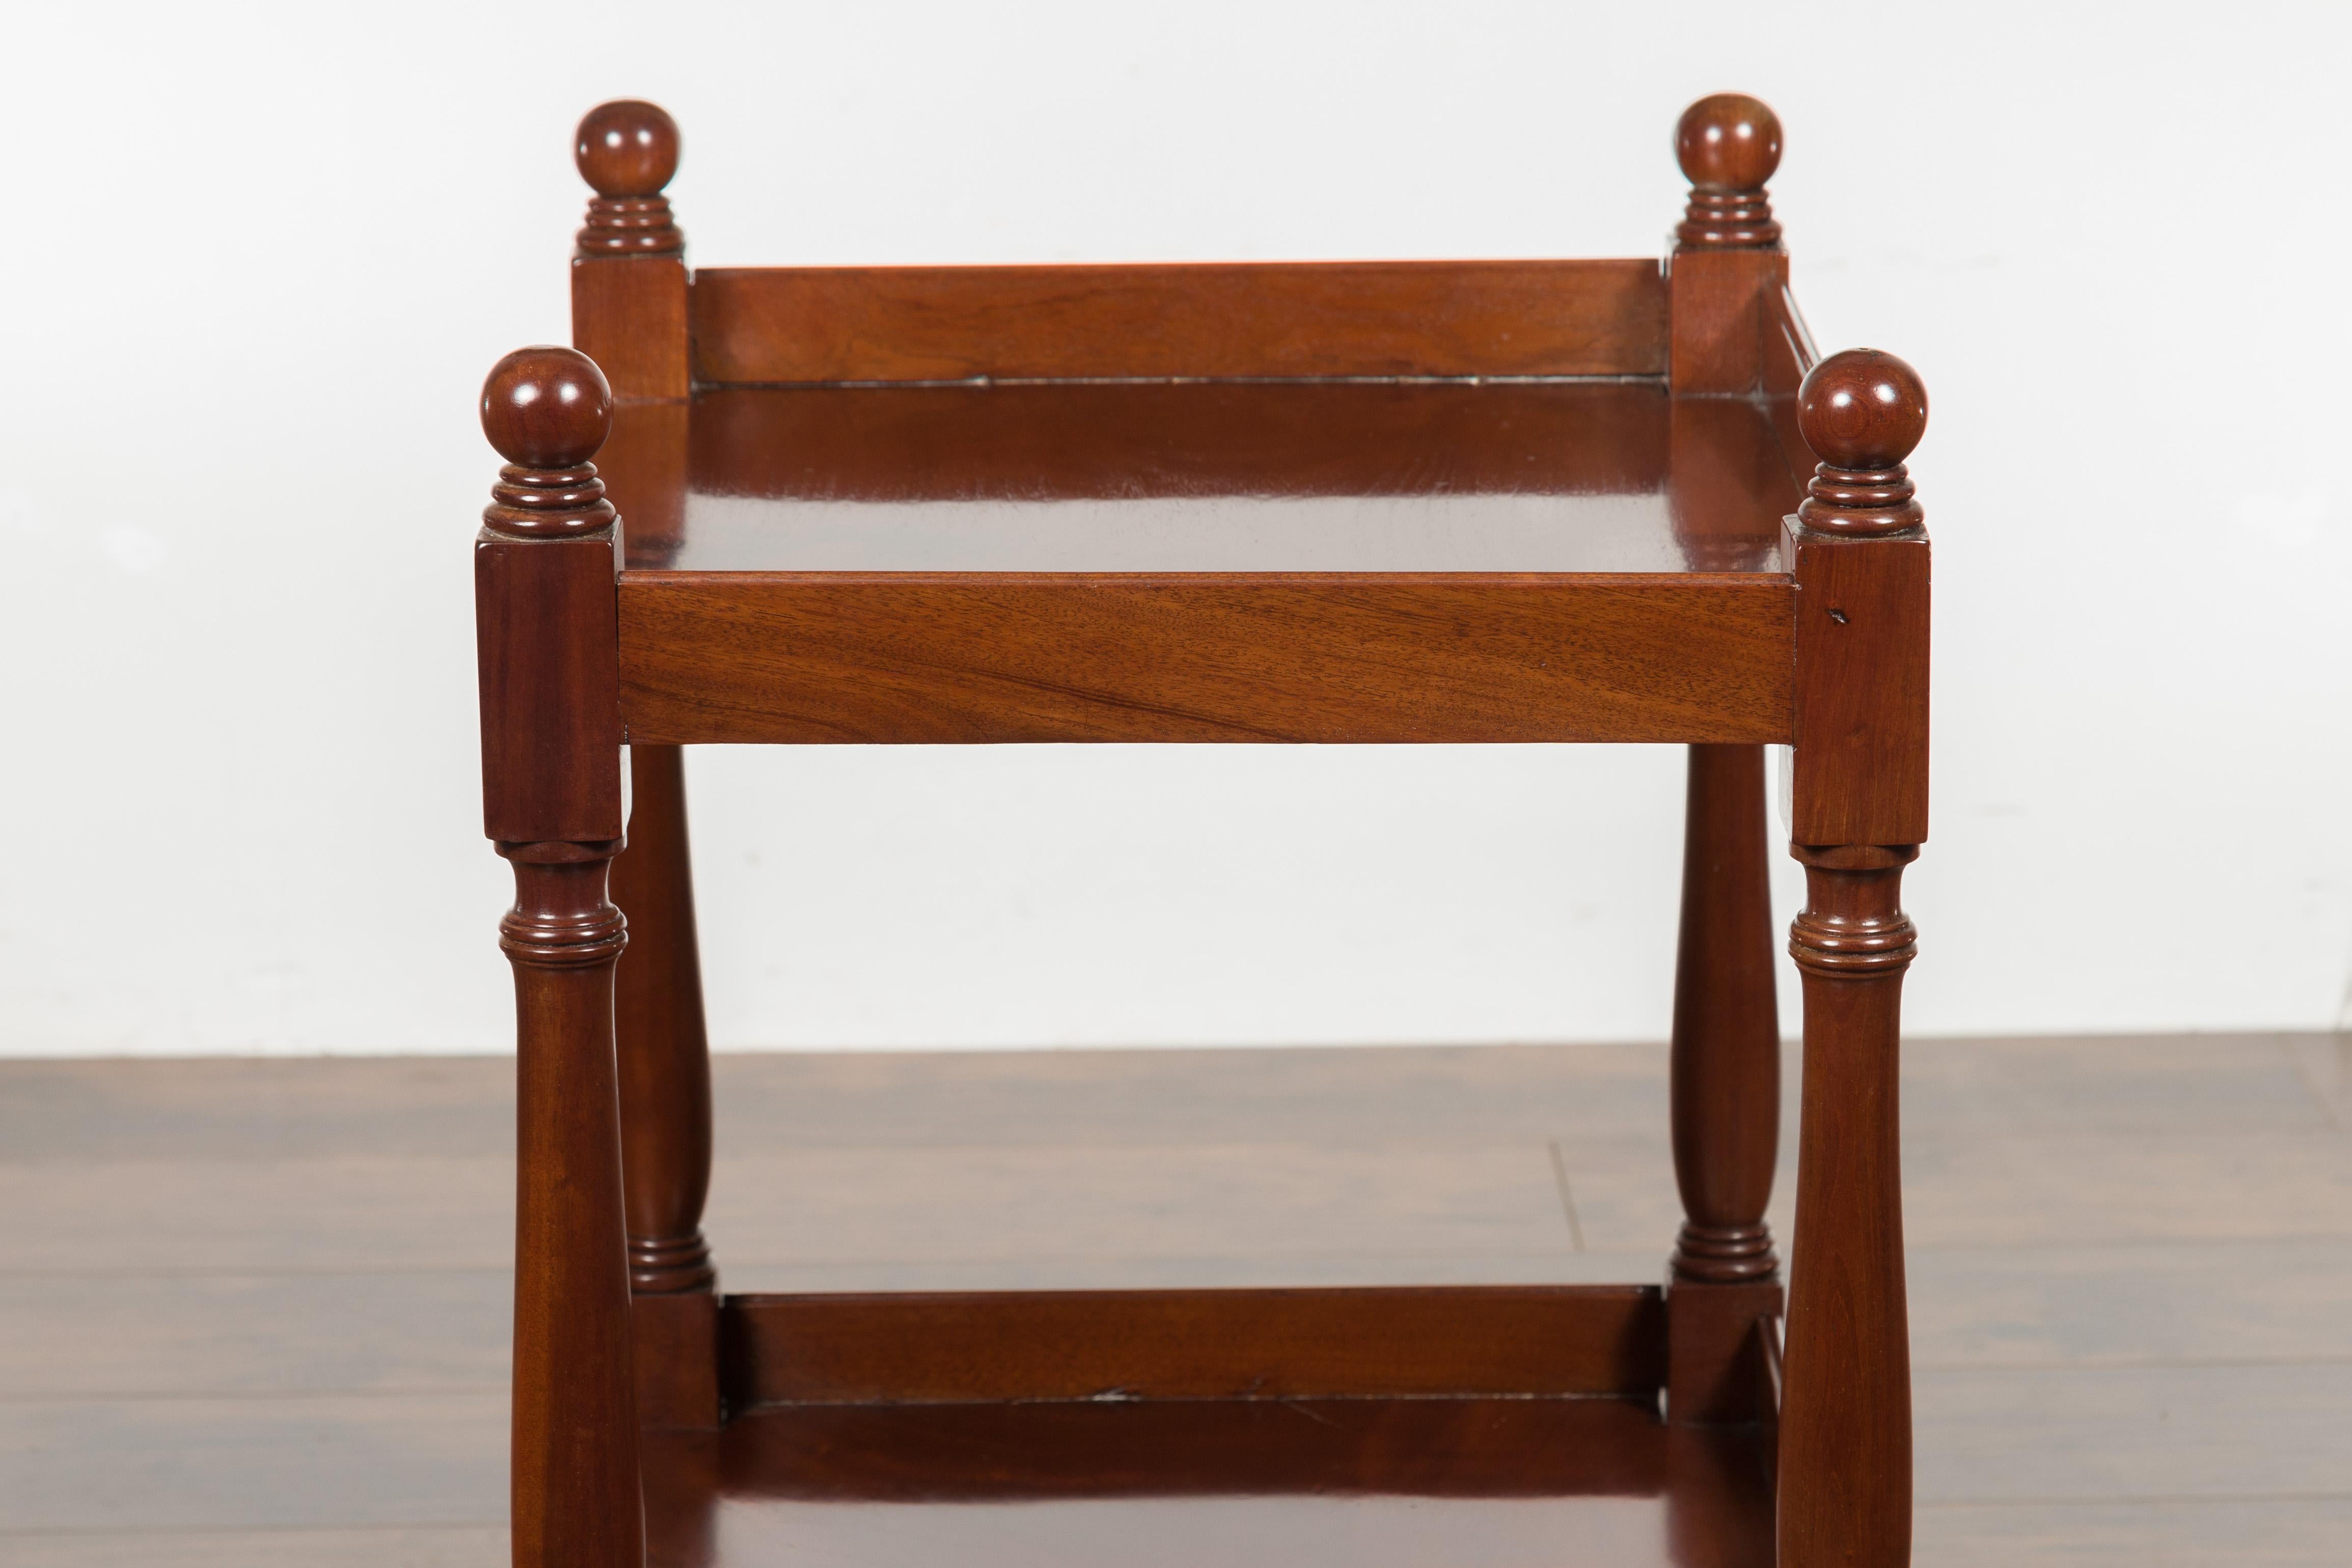 English 1870s Mahogany Tiered Table with Turned Legs and Low Shelf and Finials 11